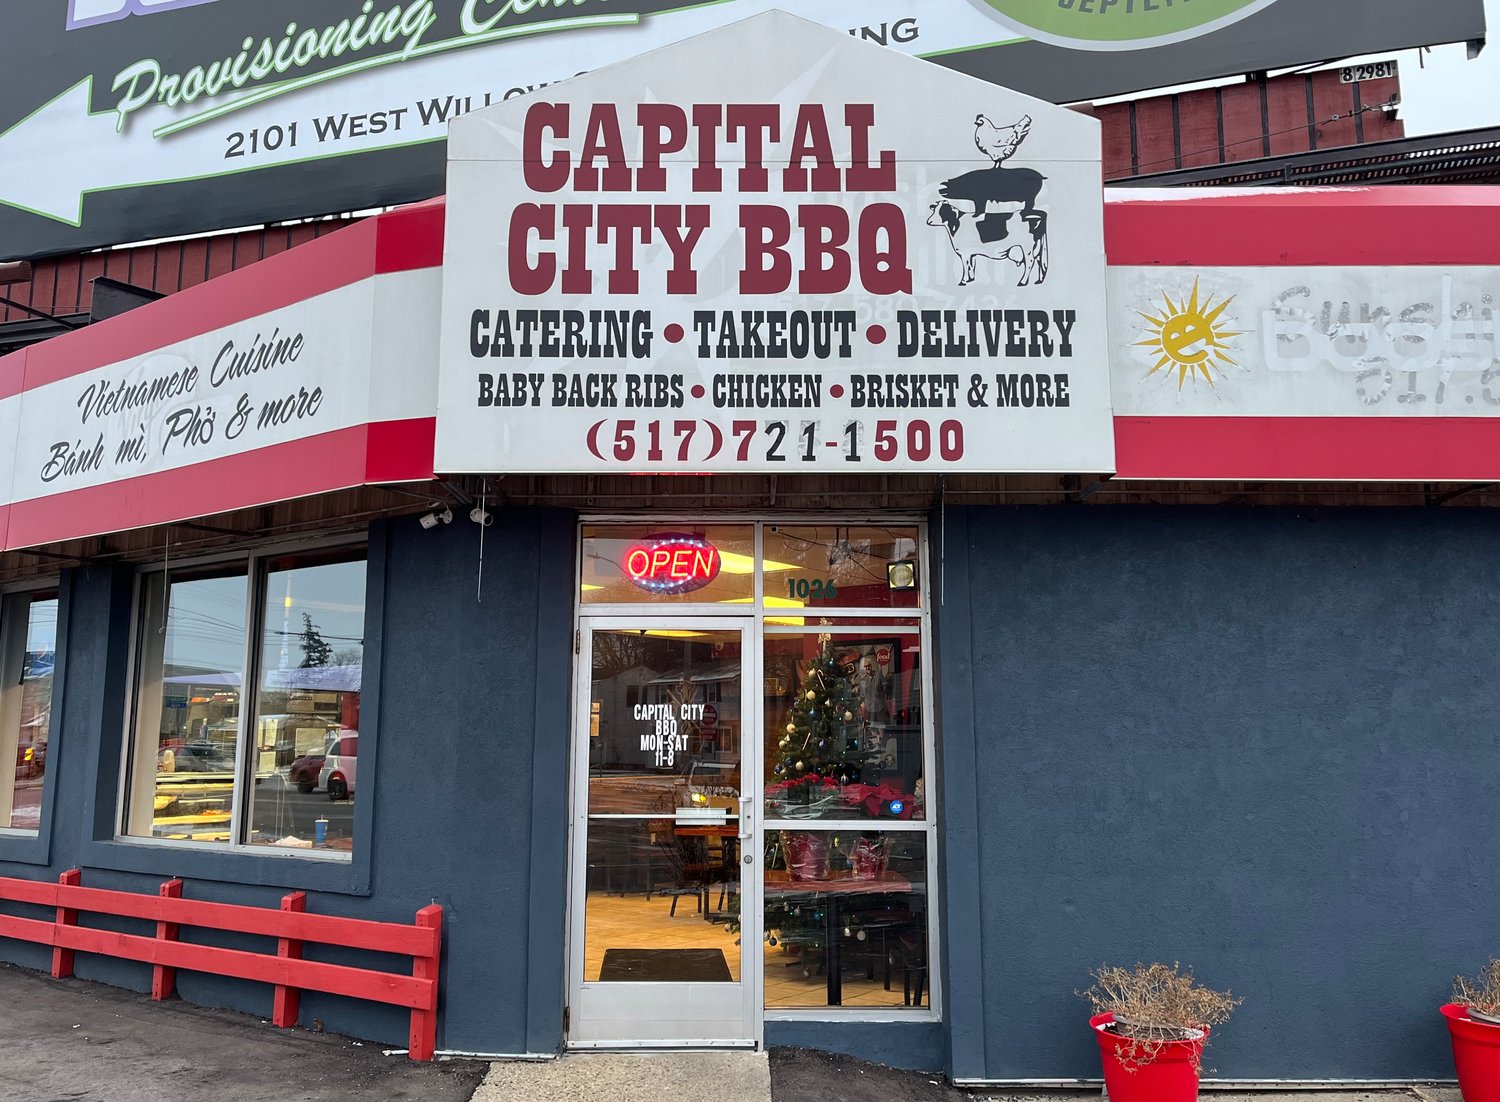 Though its facade has been renovated, you can still make out the remnants of the original cell phone store banner on the front of Capital City BBQ.